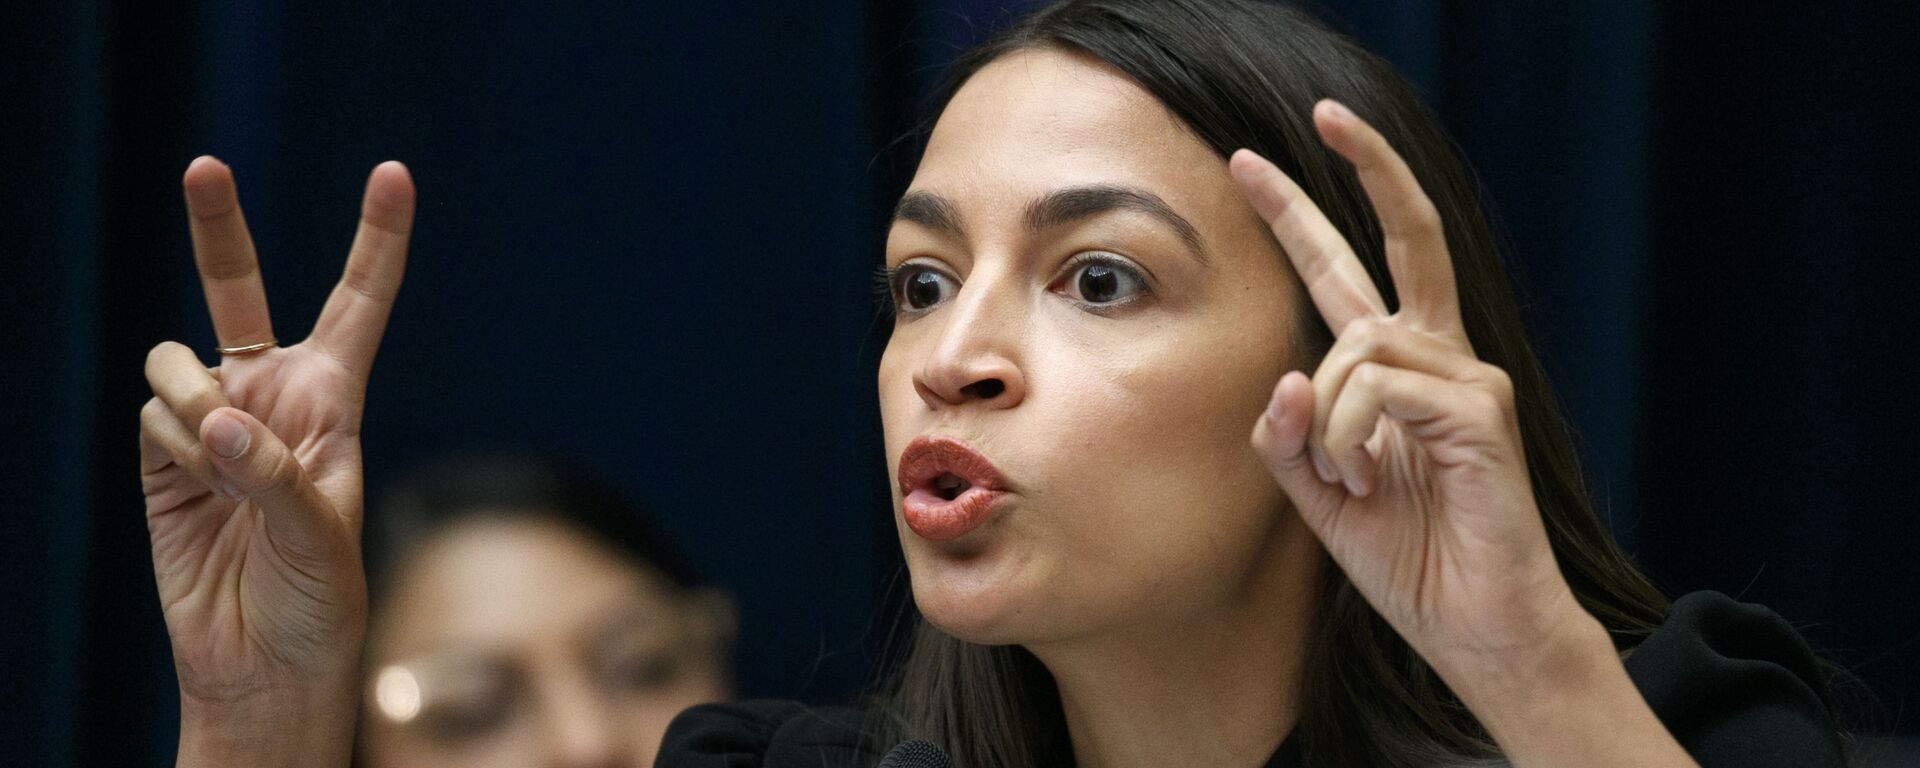 Rep. Alexandria Ocasio-Cortez, D-N.Y., asks a question during a House Oversight subcommittee hearing into the Trump administration's decision to stop considering requests from immigrants seeking to remain in the country for medical treatment and other hardships, Wednesday, Sept. 11, 2019, in Washington. - Sputnik International, 1920, 13.07.2020